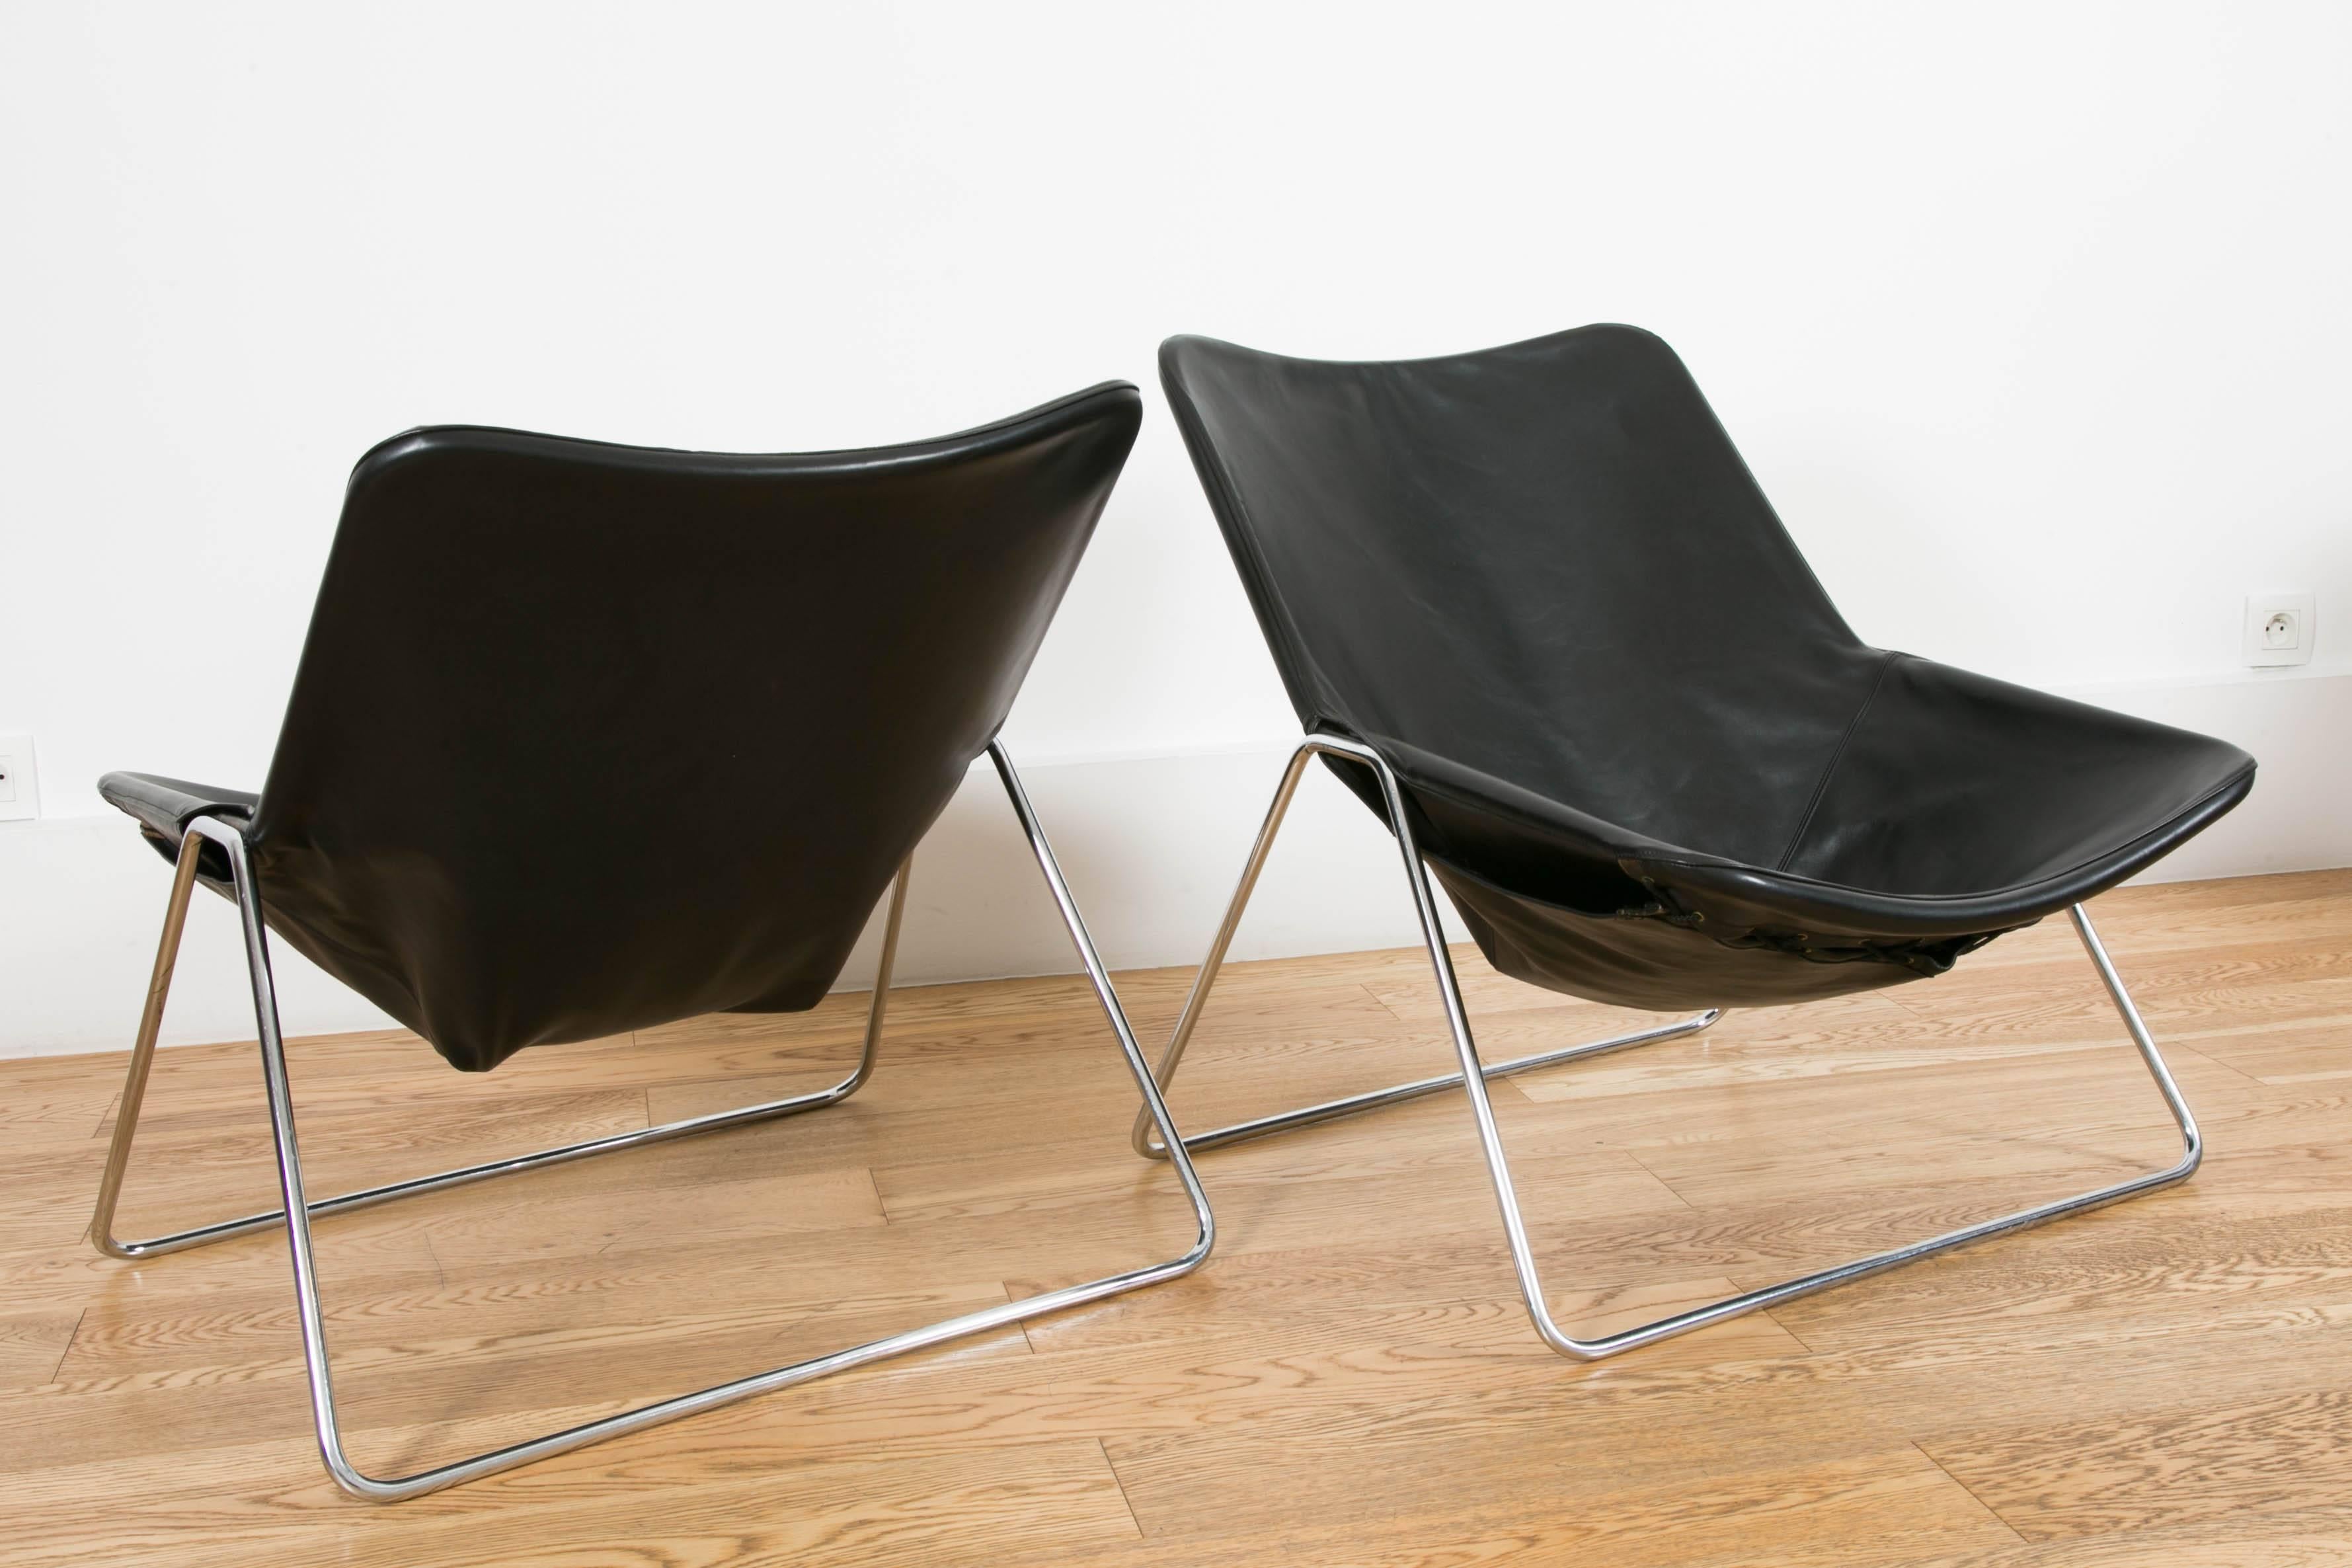 Mid-20th Century Pair of chairs G1 by Pierre Guariche - Airborne edition - 1953 For Sale